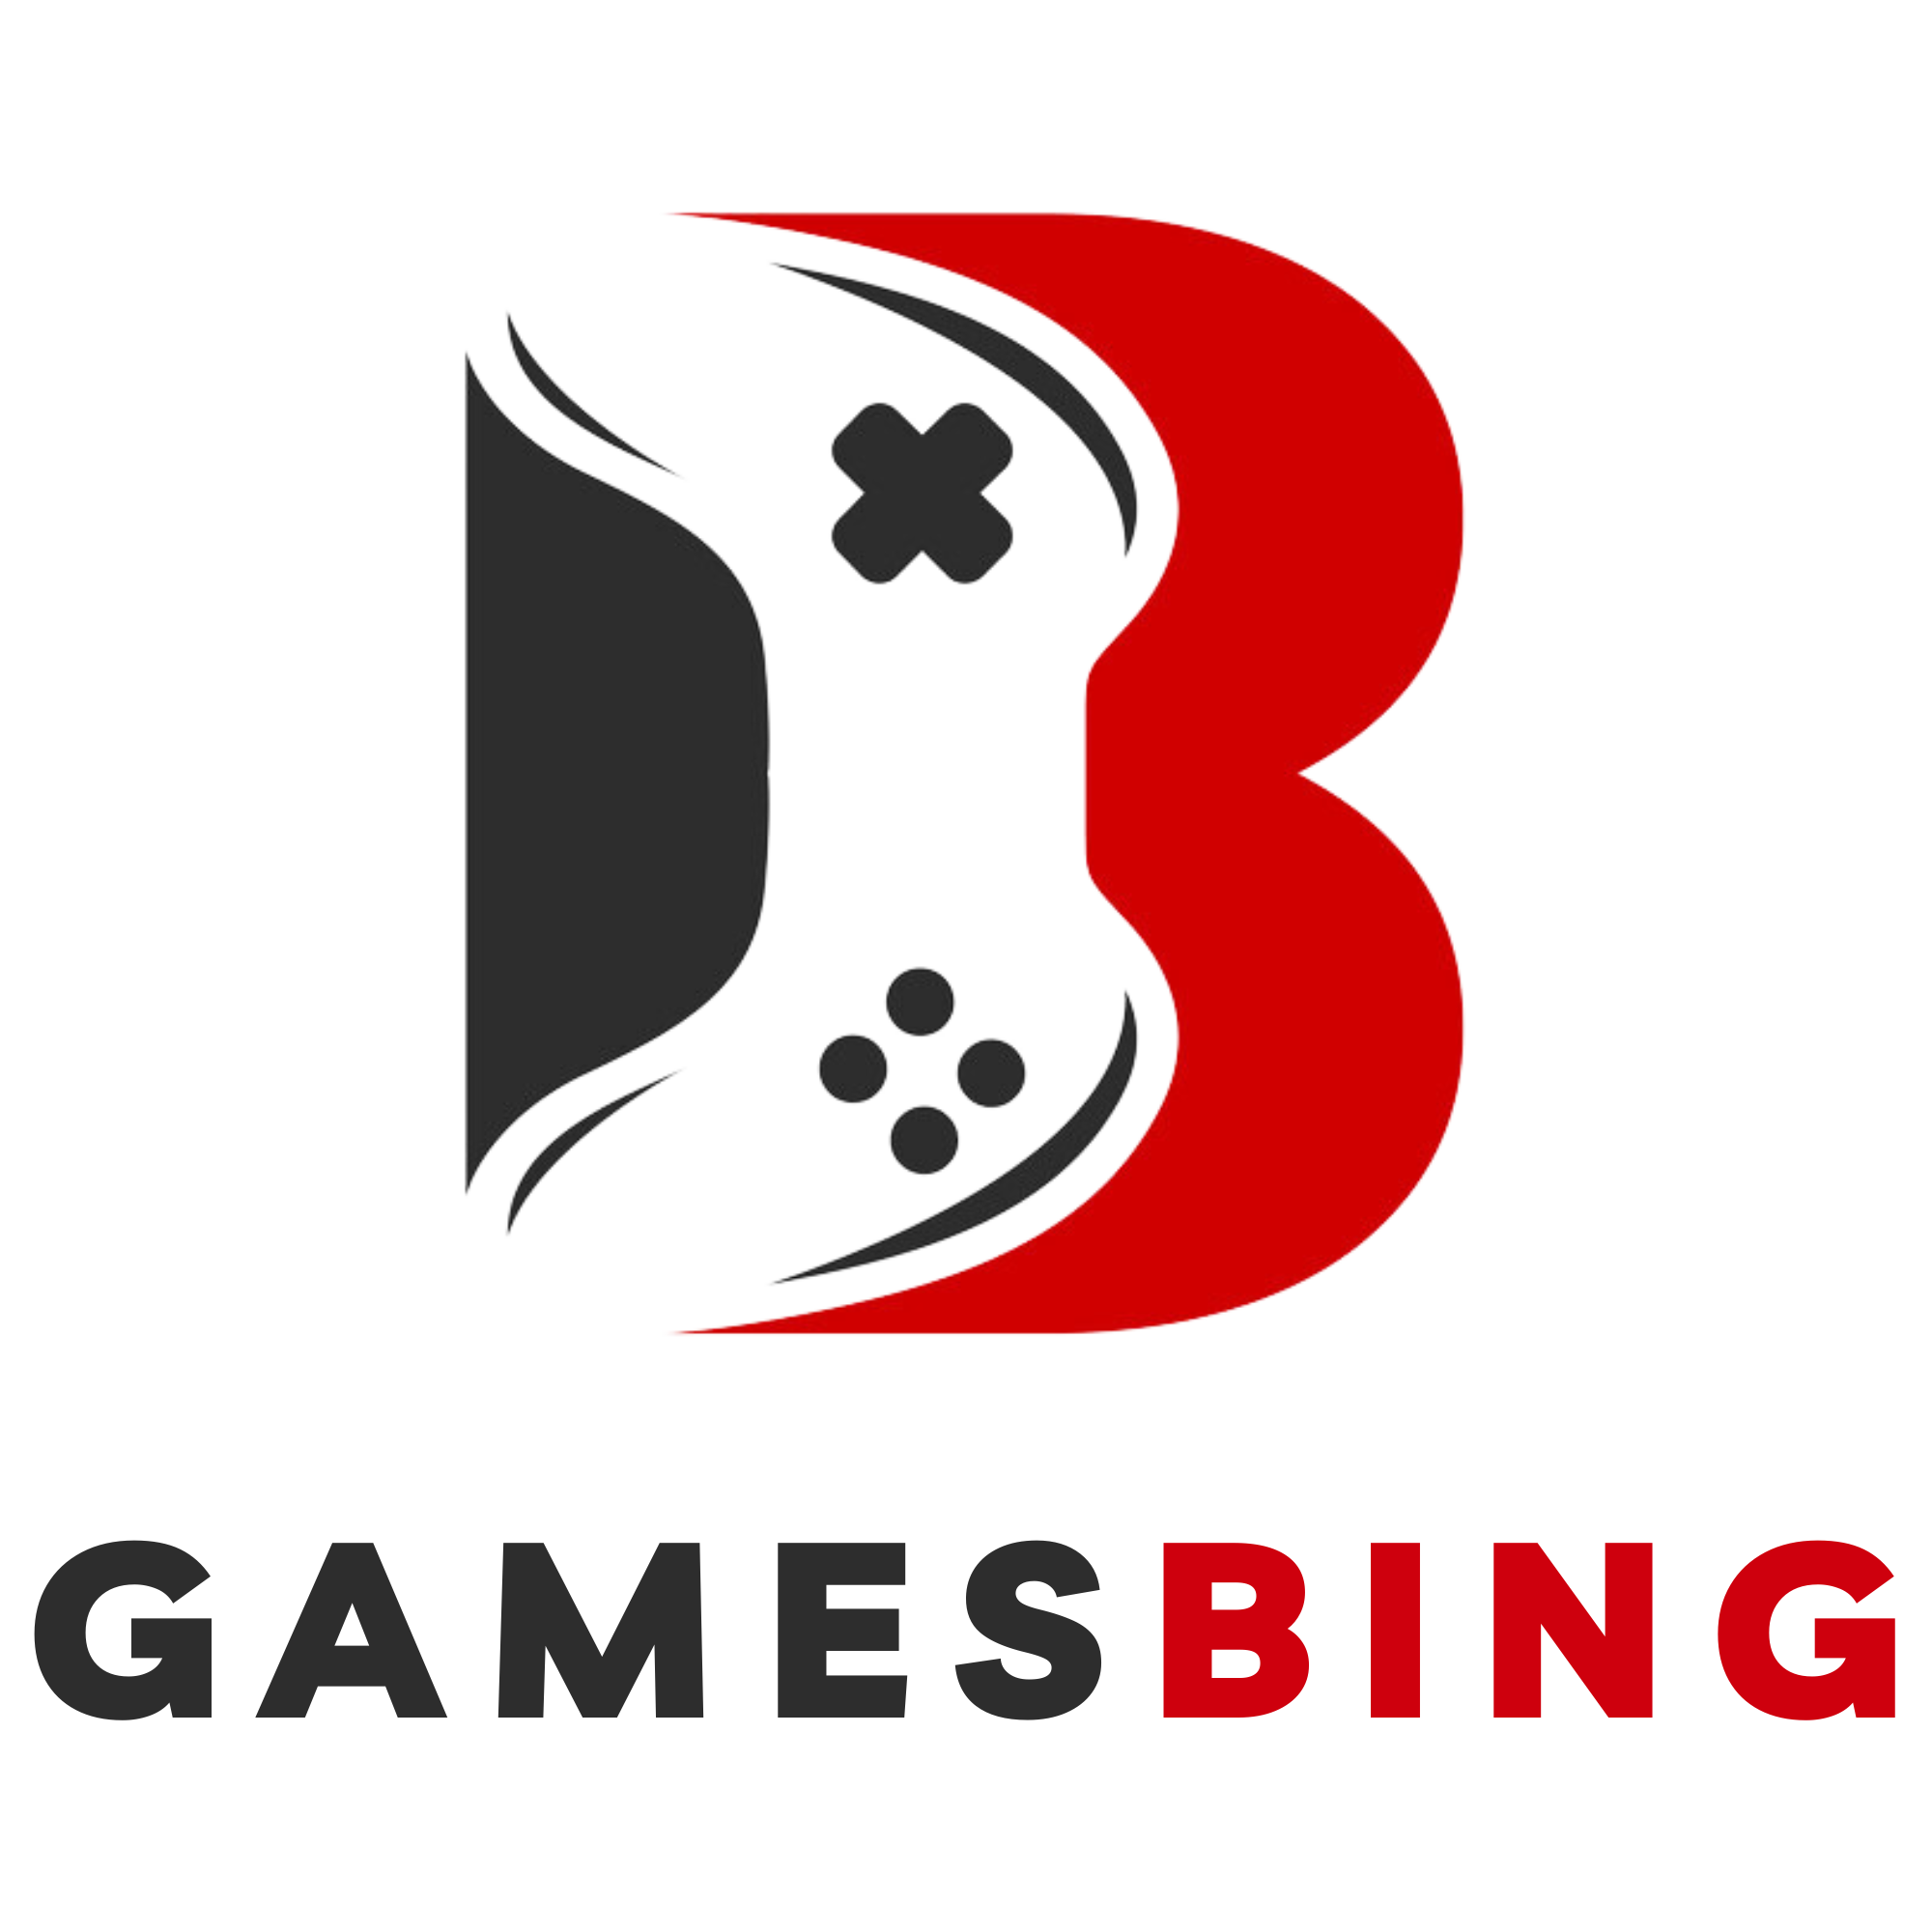 Gamesbing: Games, Crypto, Casino (Top 1 in the gaming world)